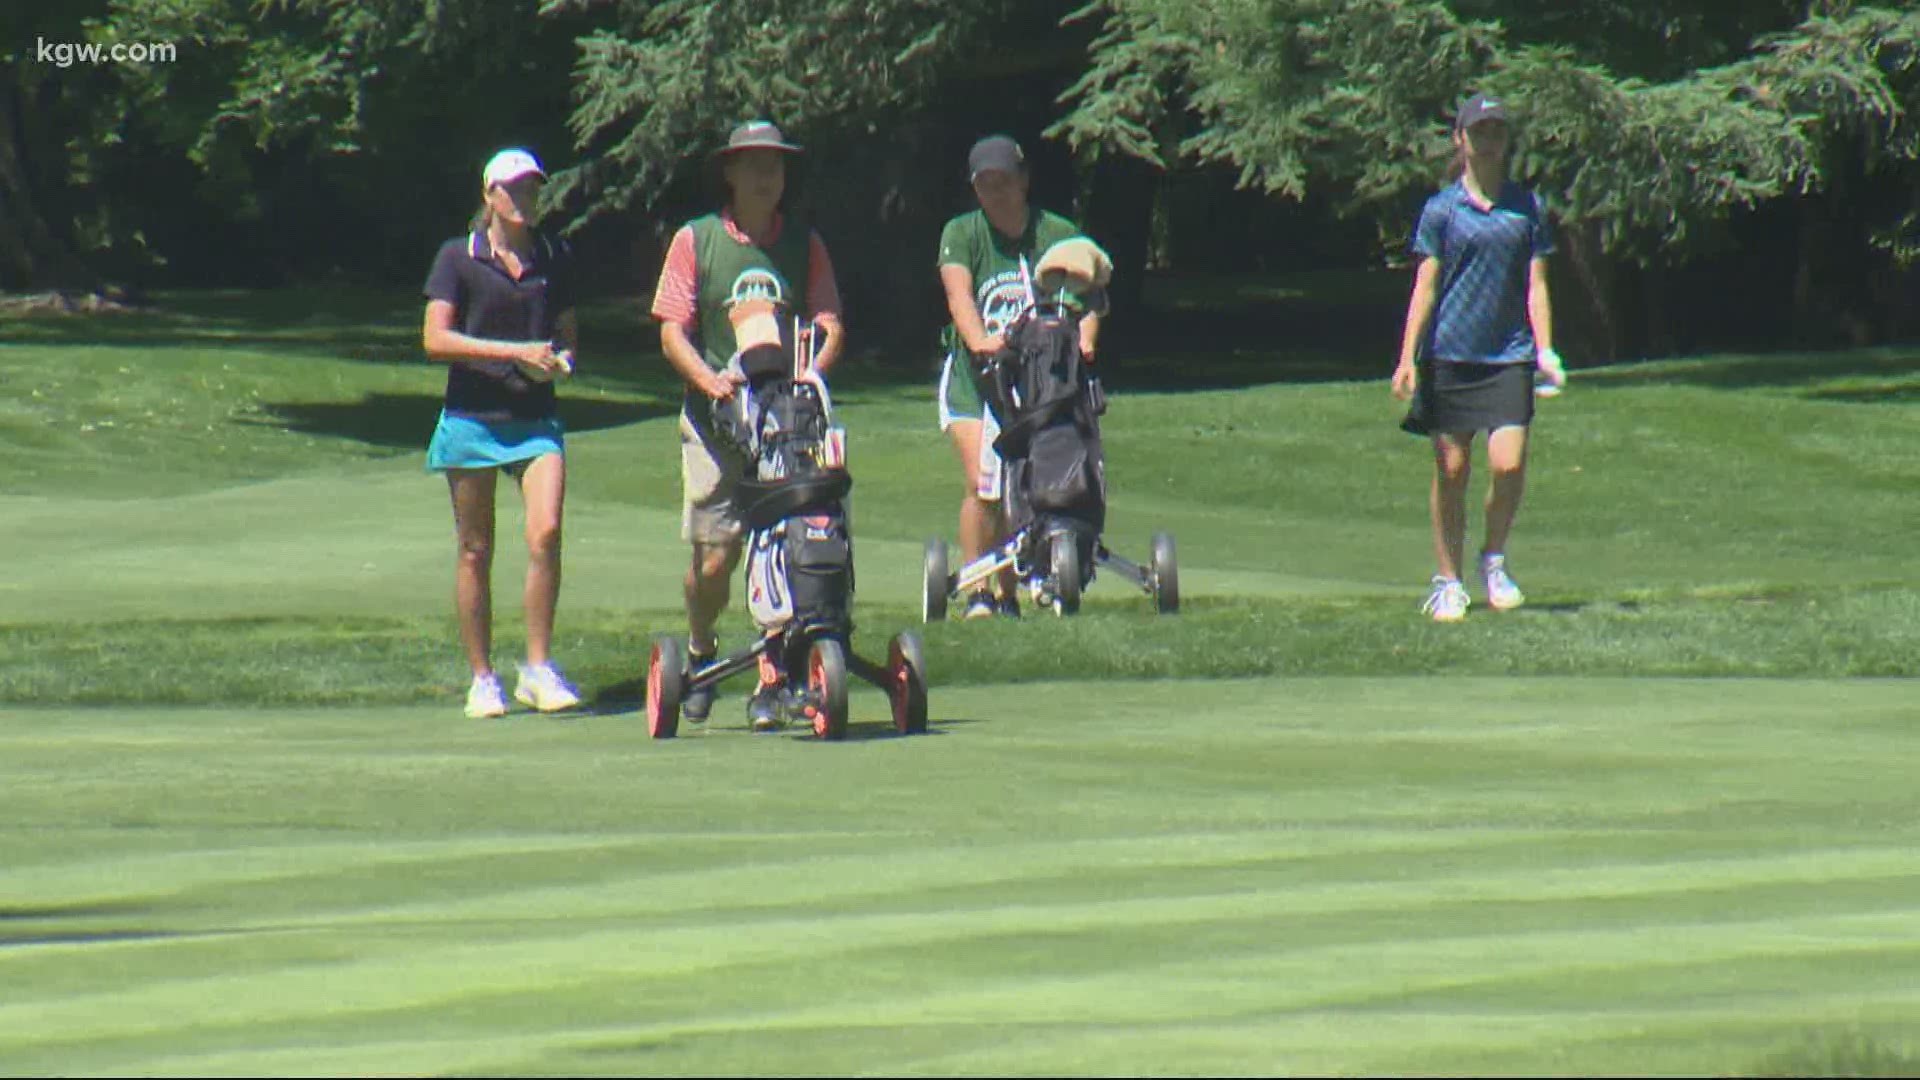 111th Oregon Amateur Golf Championships are in full swing